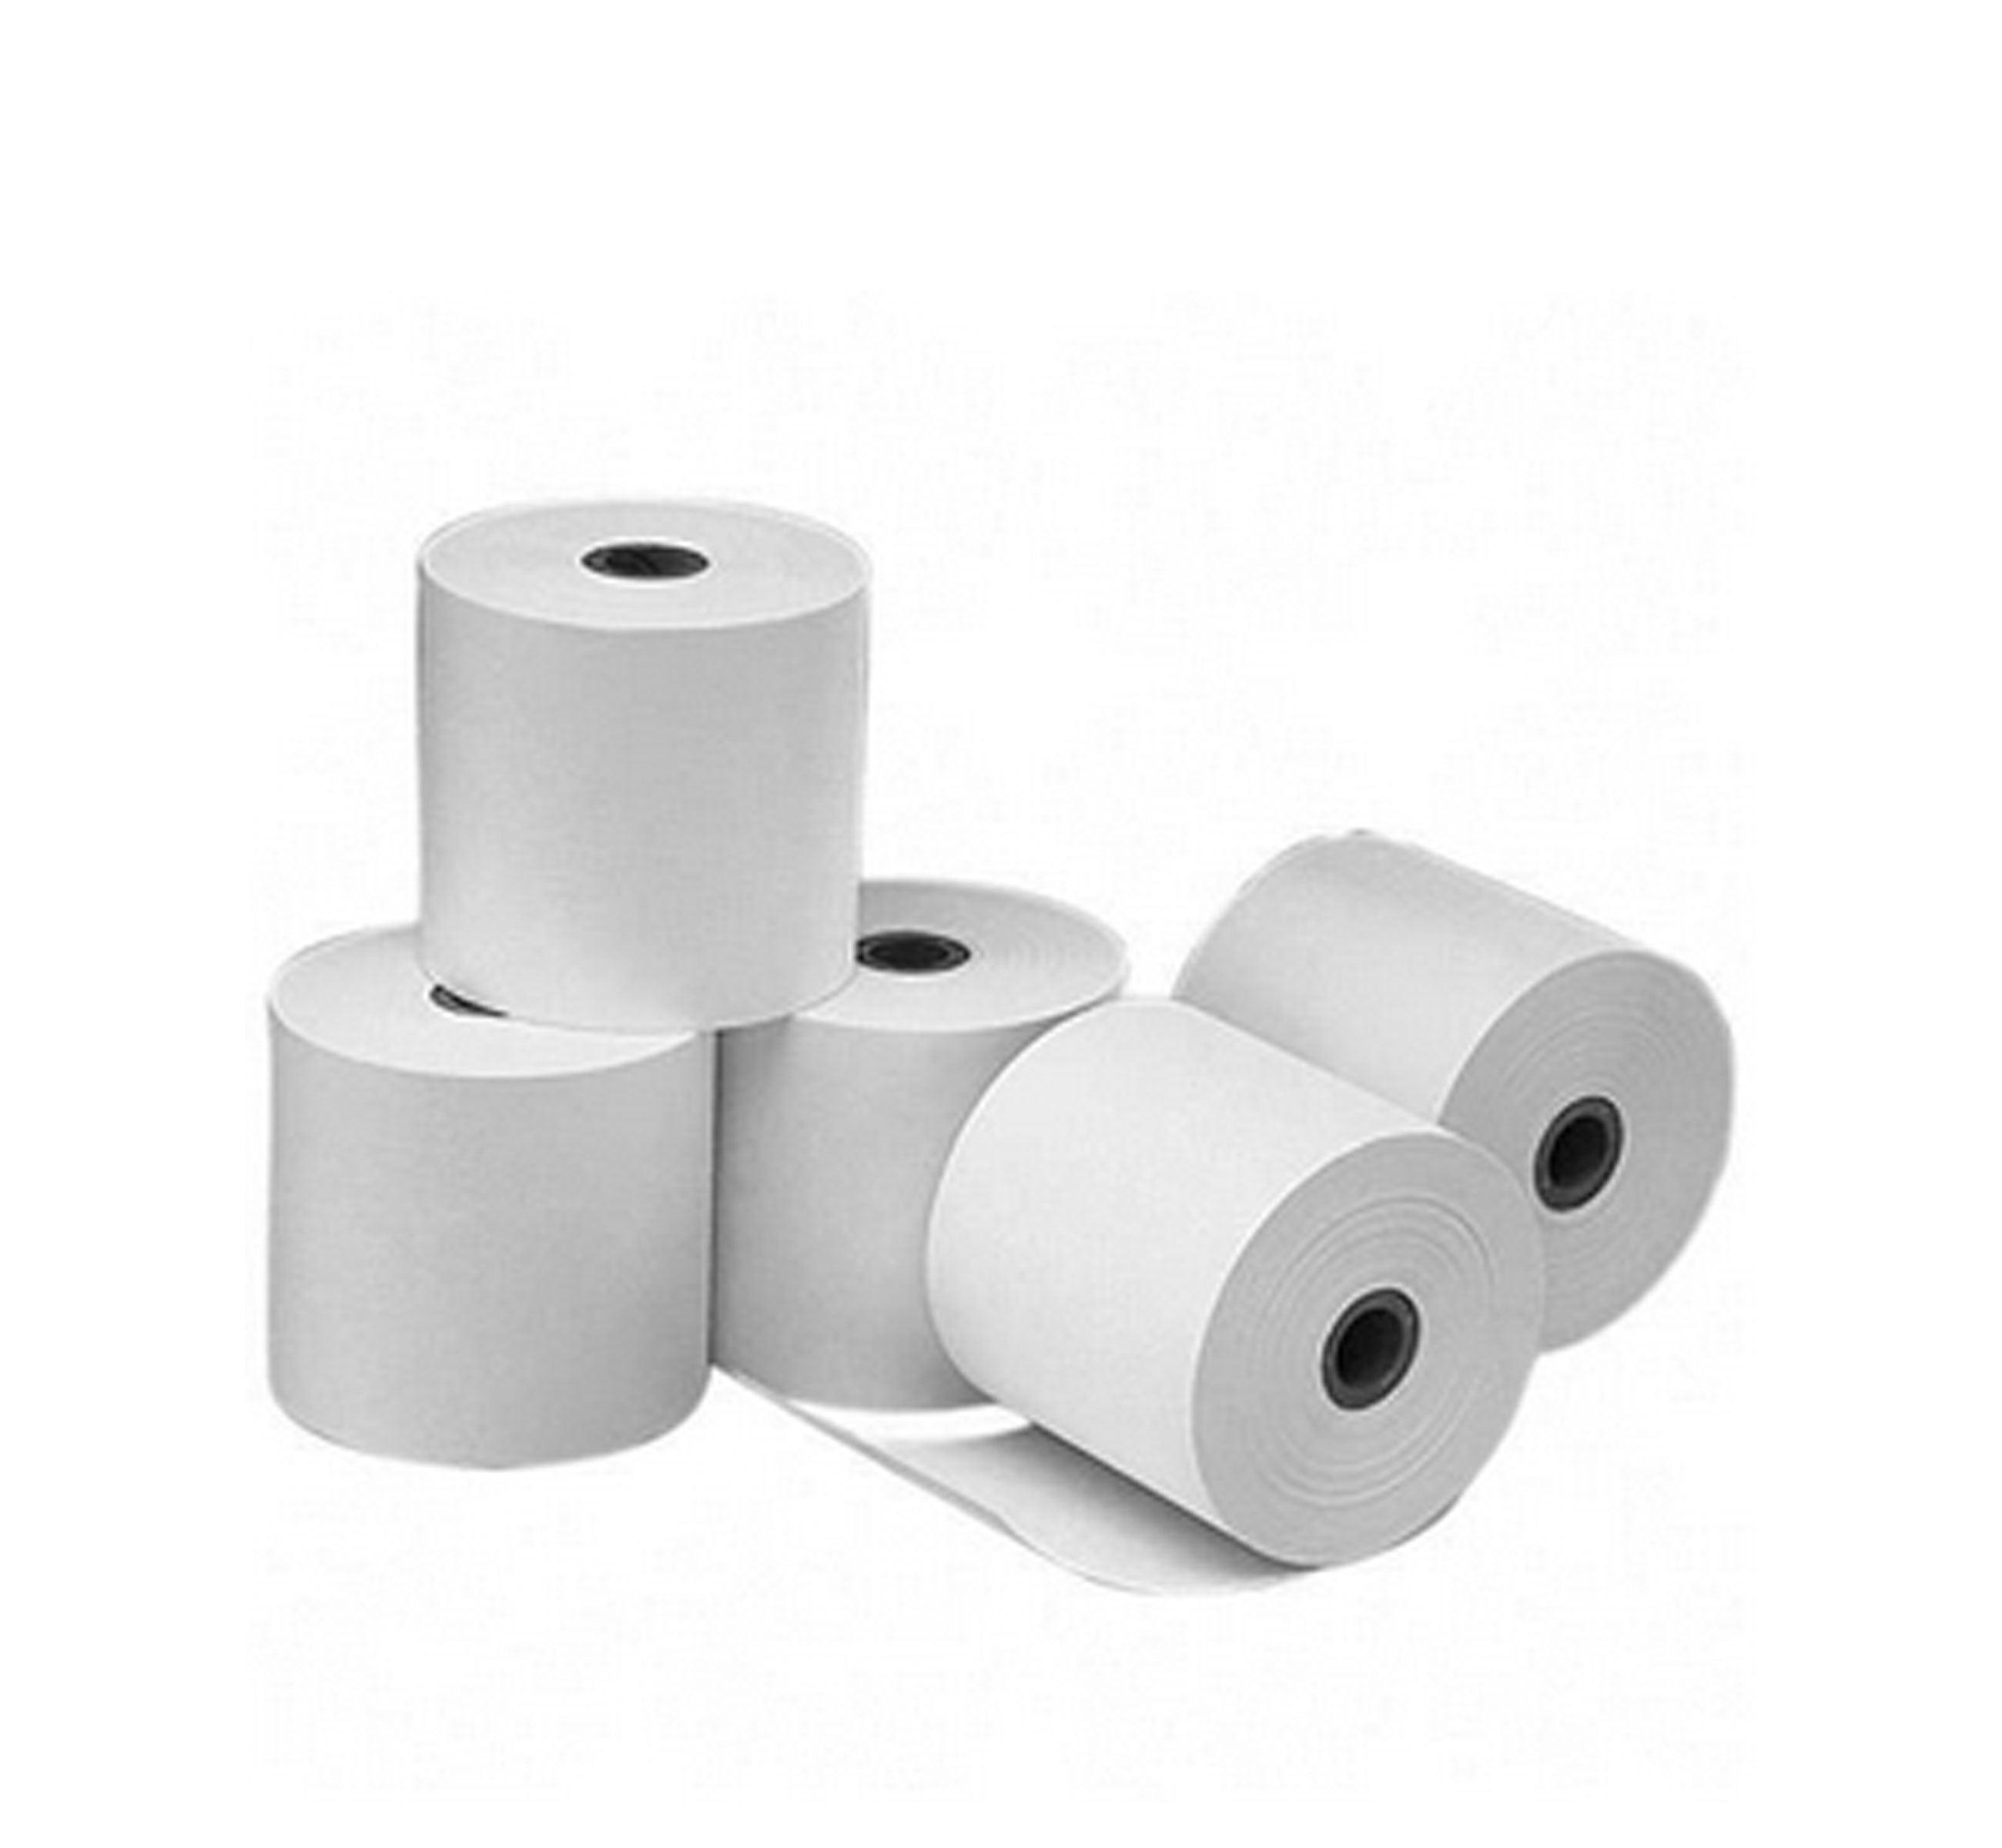 Thermal Receipt Paper (Case of 10)